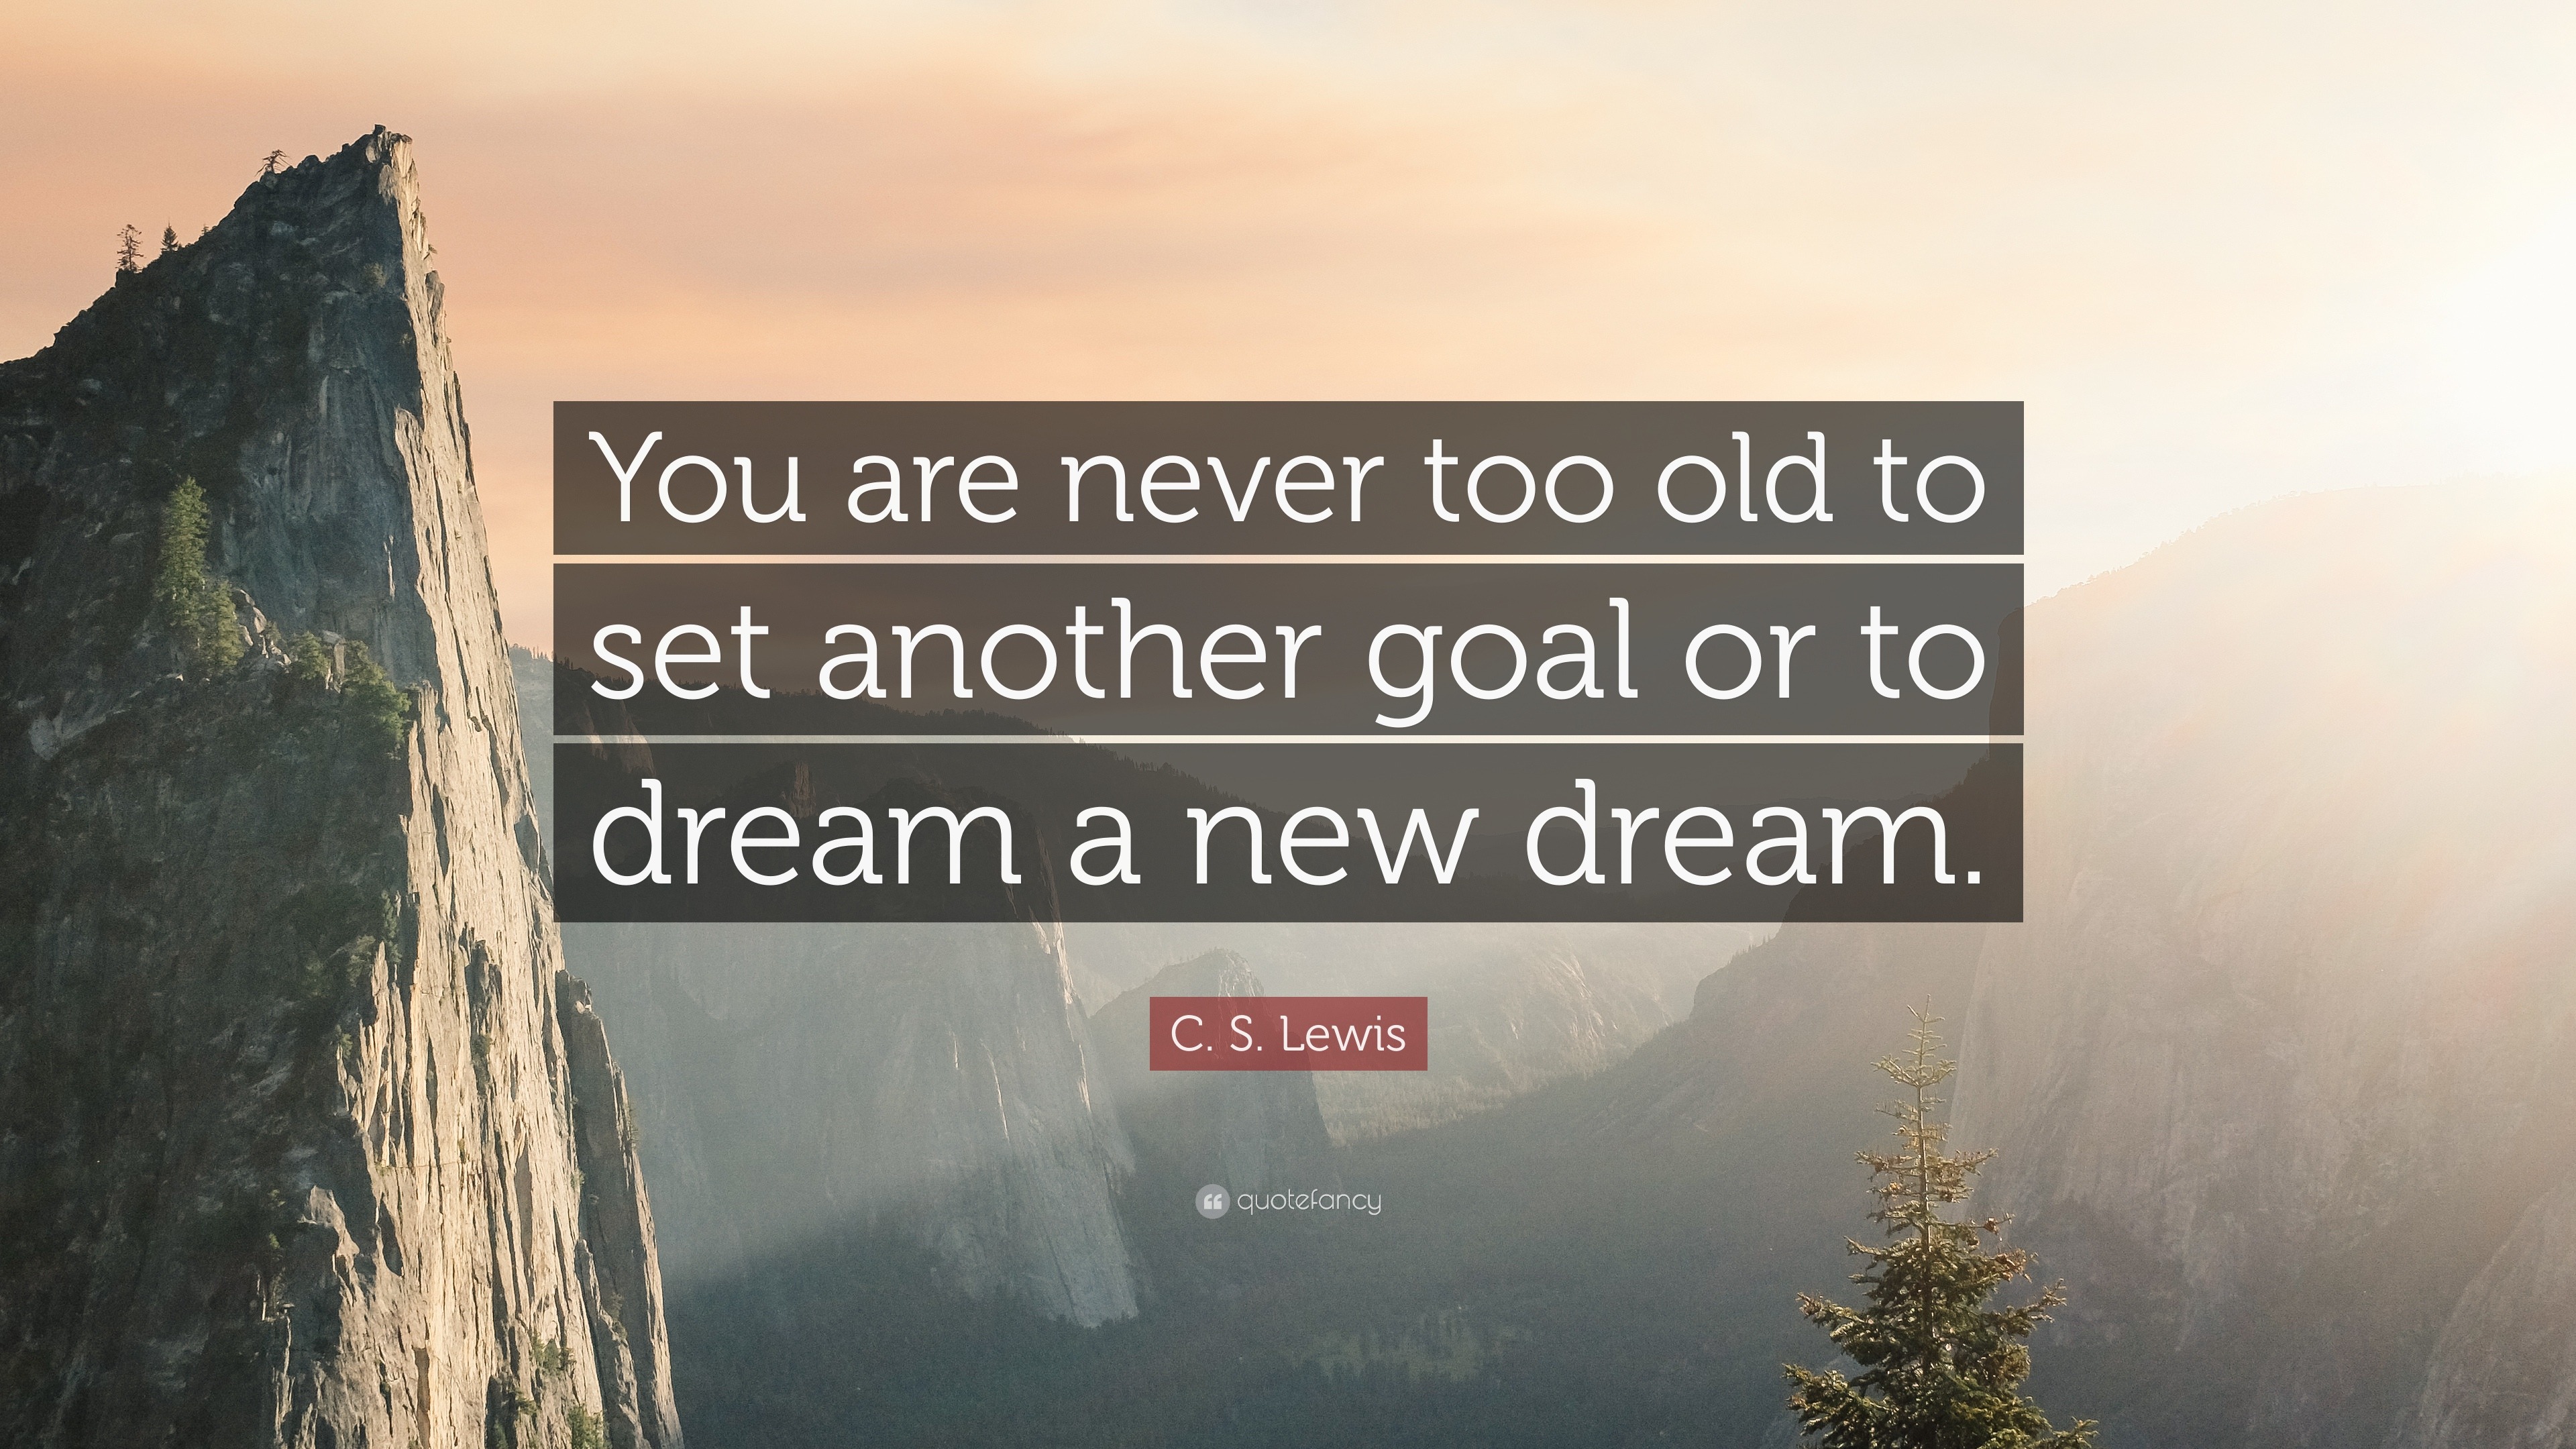 C. S. Lewis Quote: “You are never too old to set another goal or to